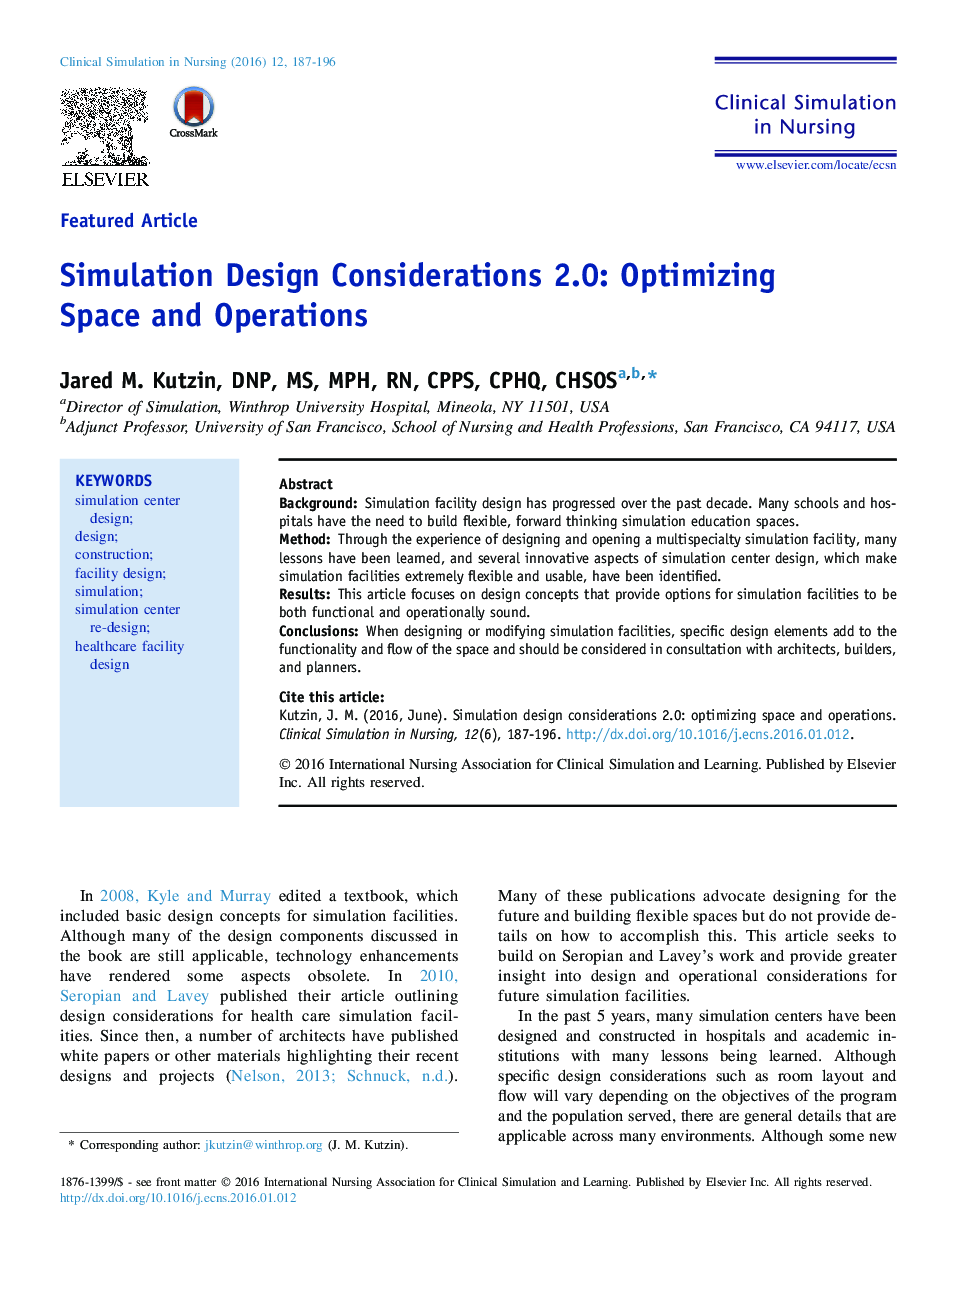 Simulation Design Considerations 2.0: Optimizing Space and Operations